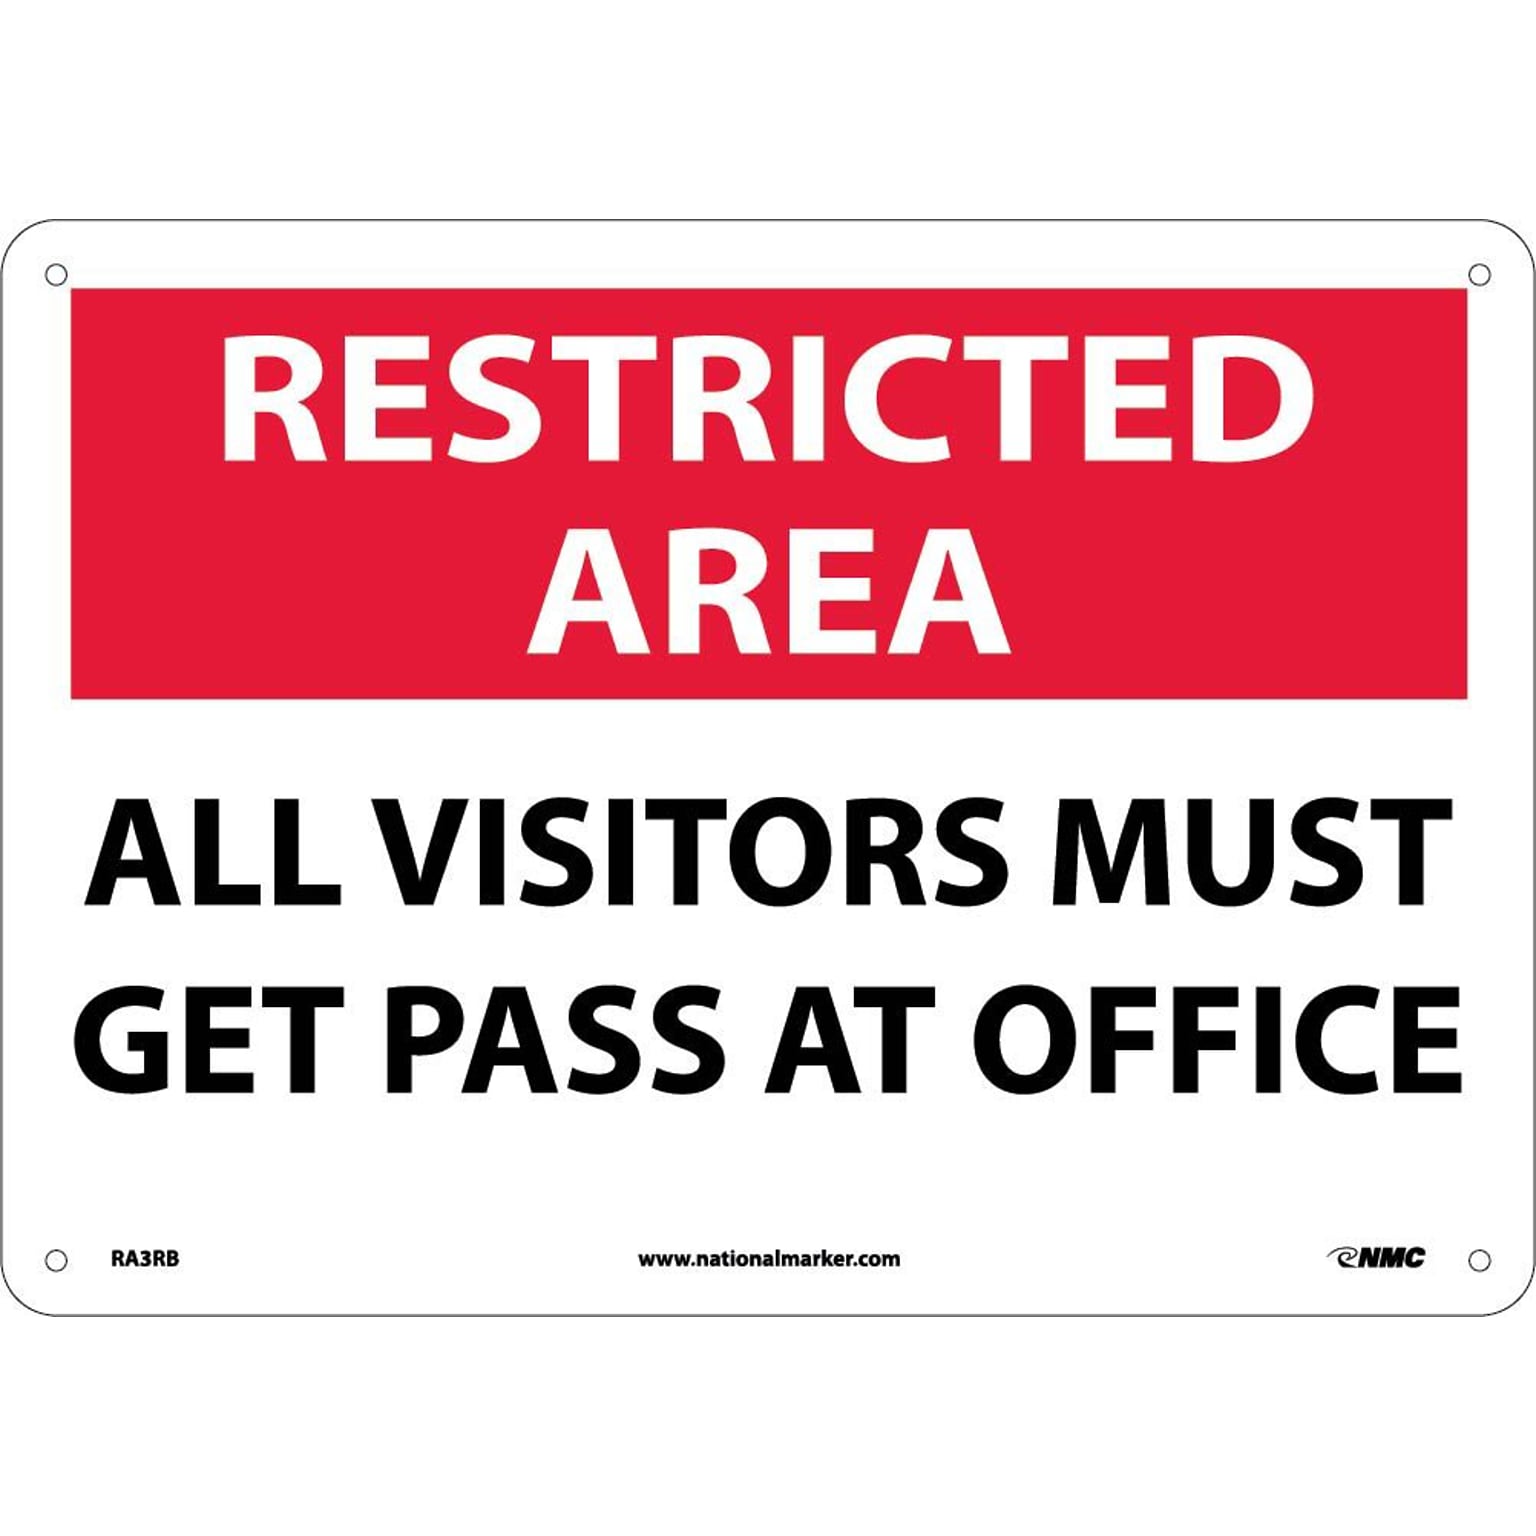 Notice Signs; Restricted Area, All Visitors Must Get Pass At Office, 10X14, Rigid Plastic